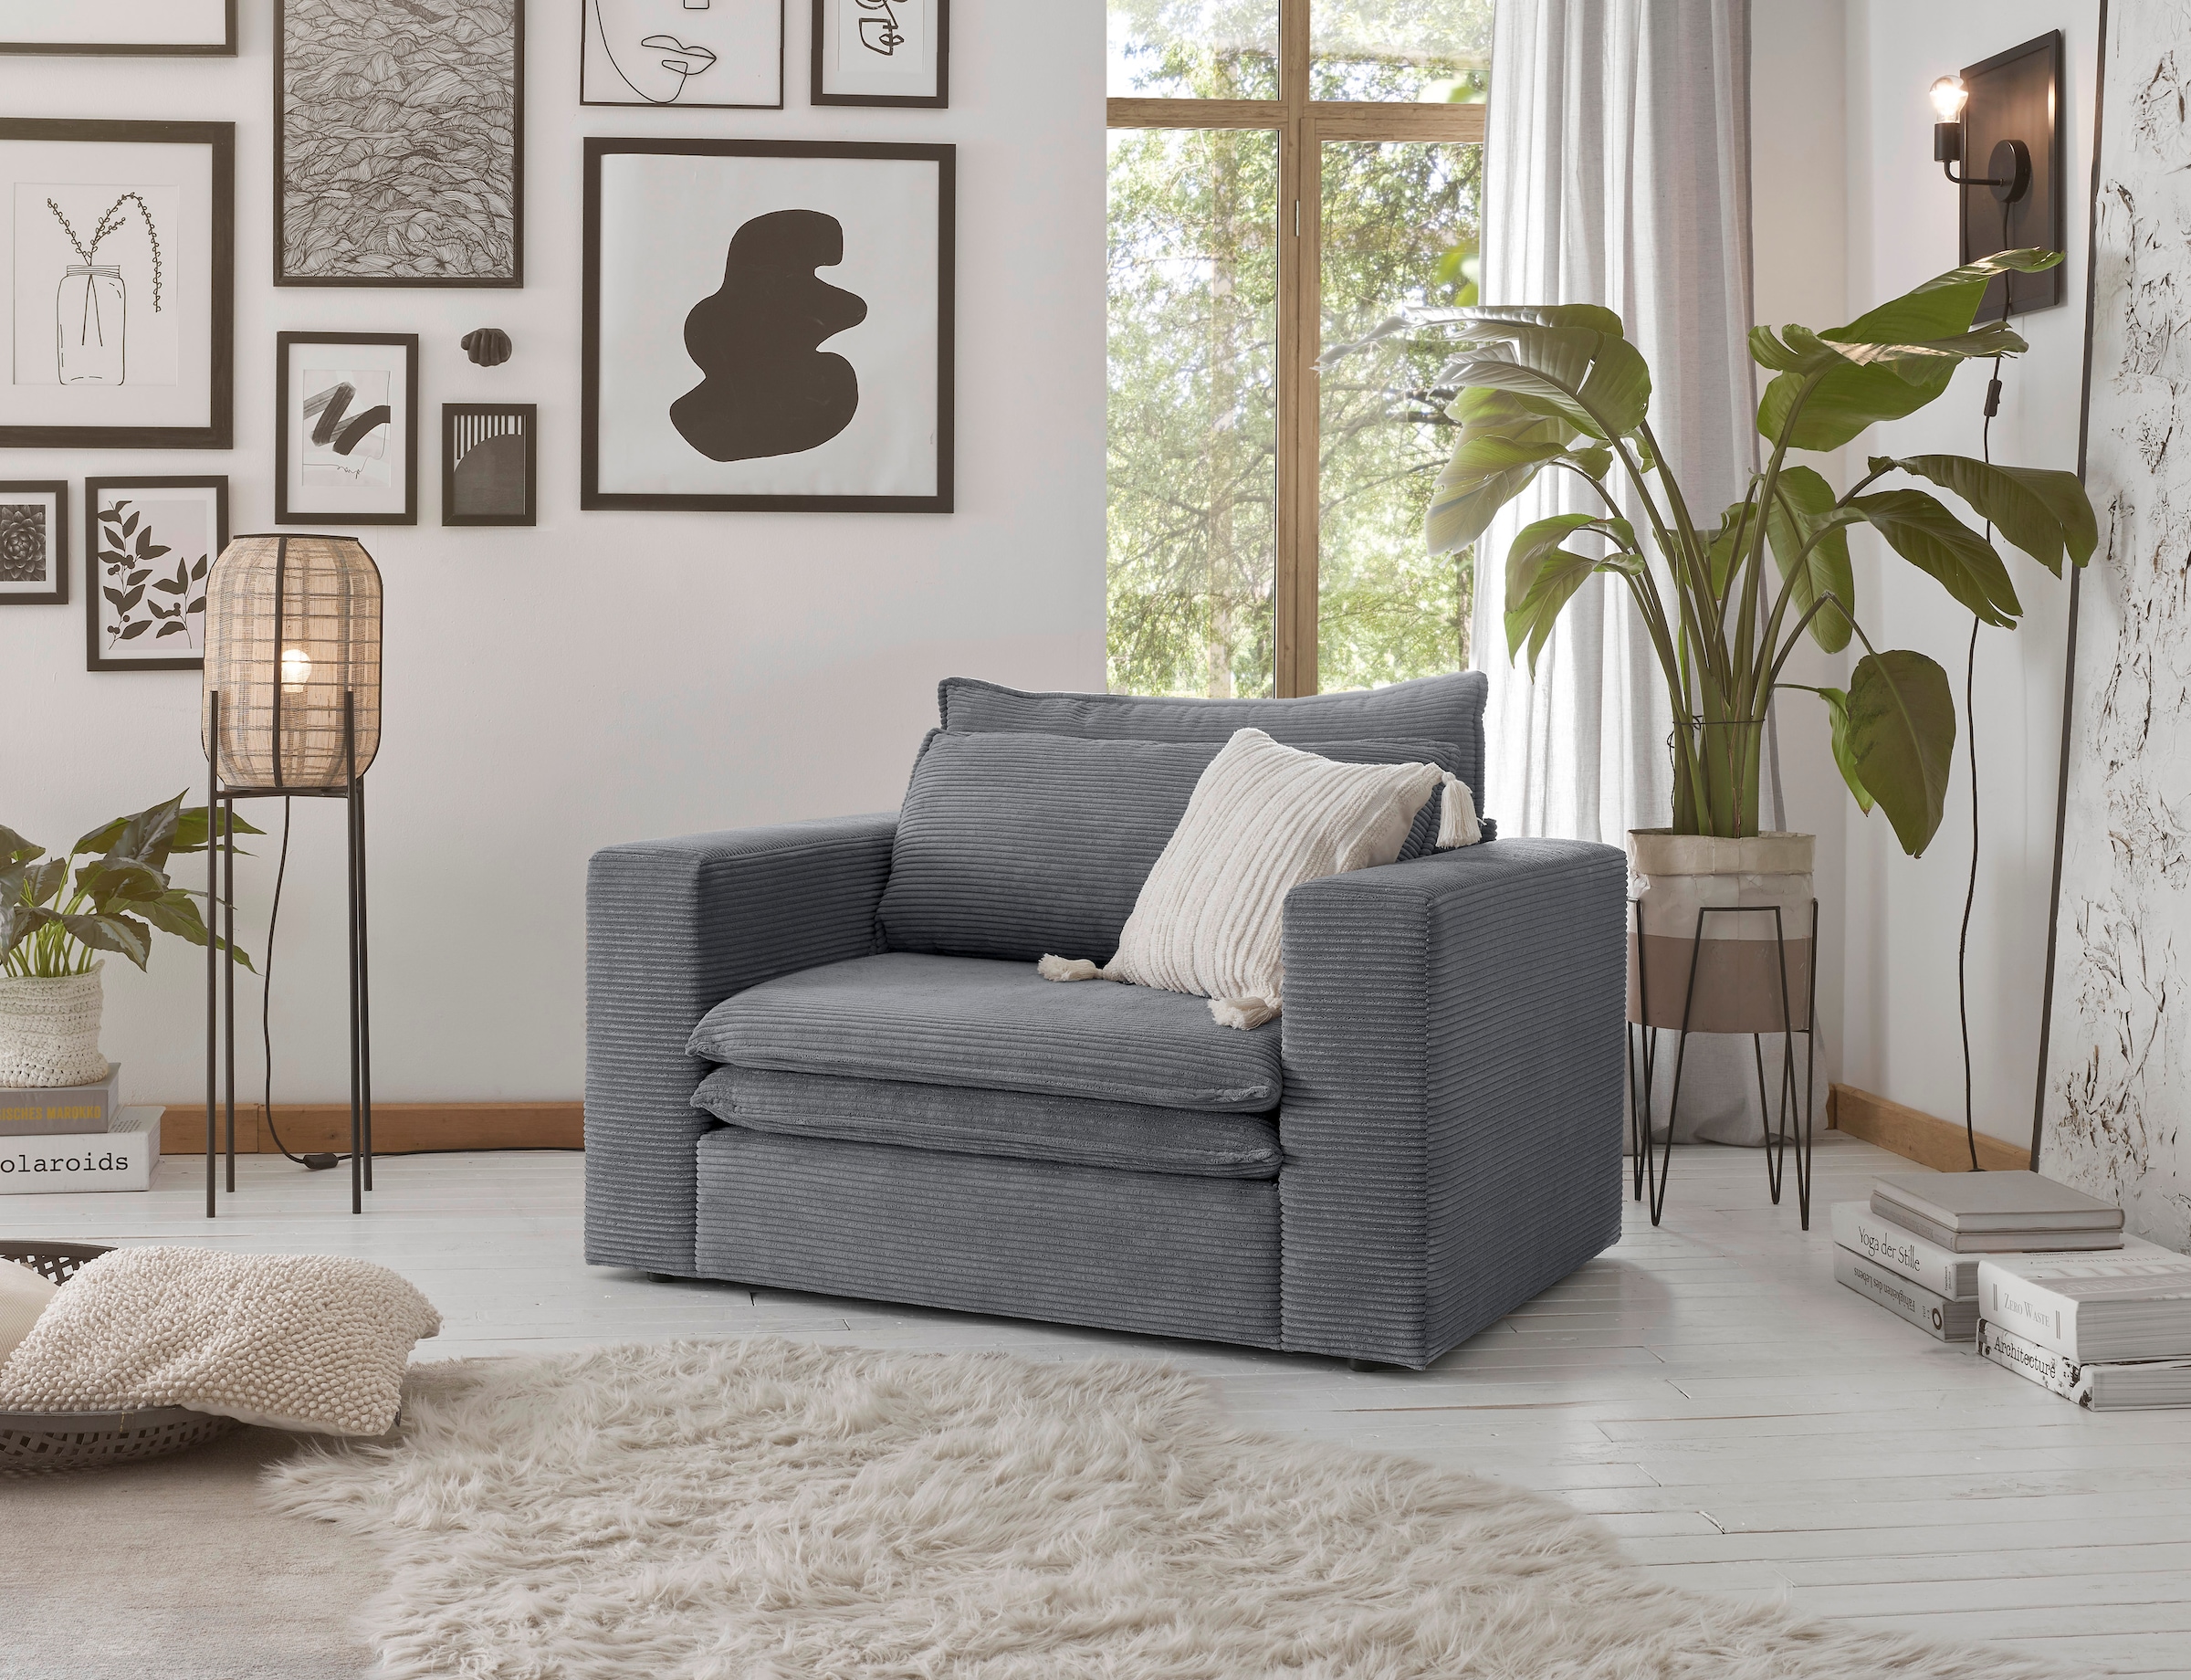 Places of Style Loveseat BAUR »PIAGGE« | kaufen